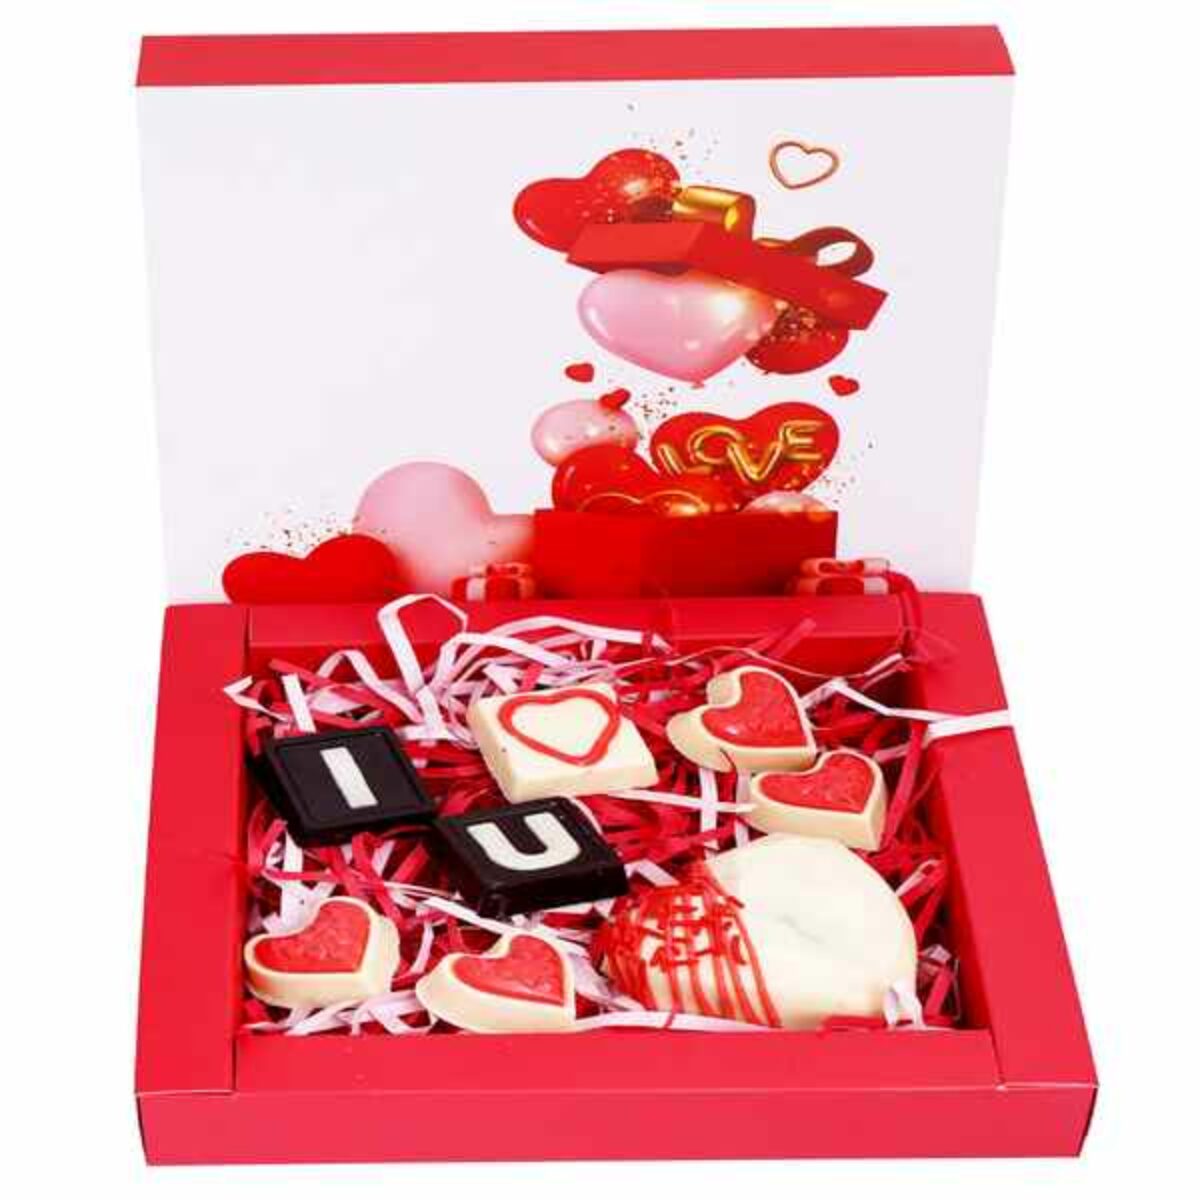 Online delivery of Valentine gifts same day freeshipping - Indiaflorist247